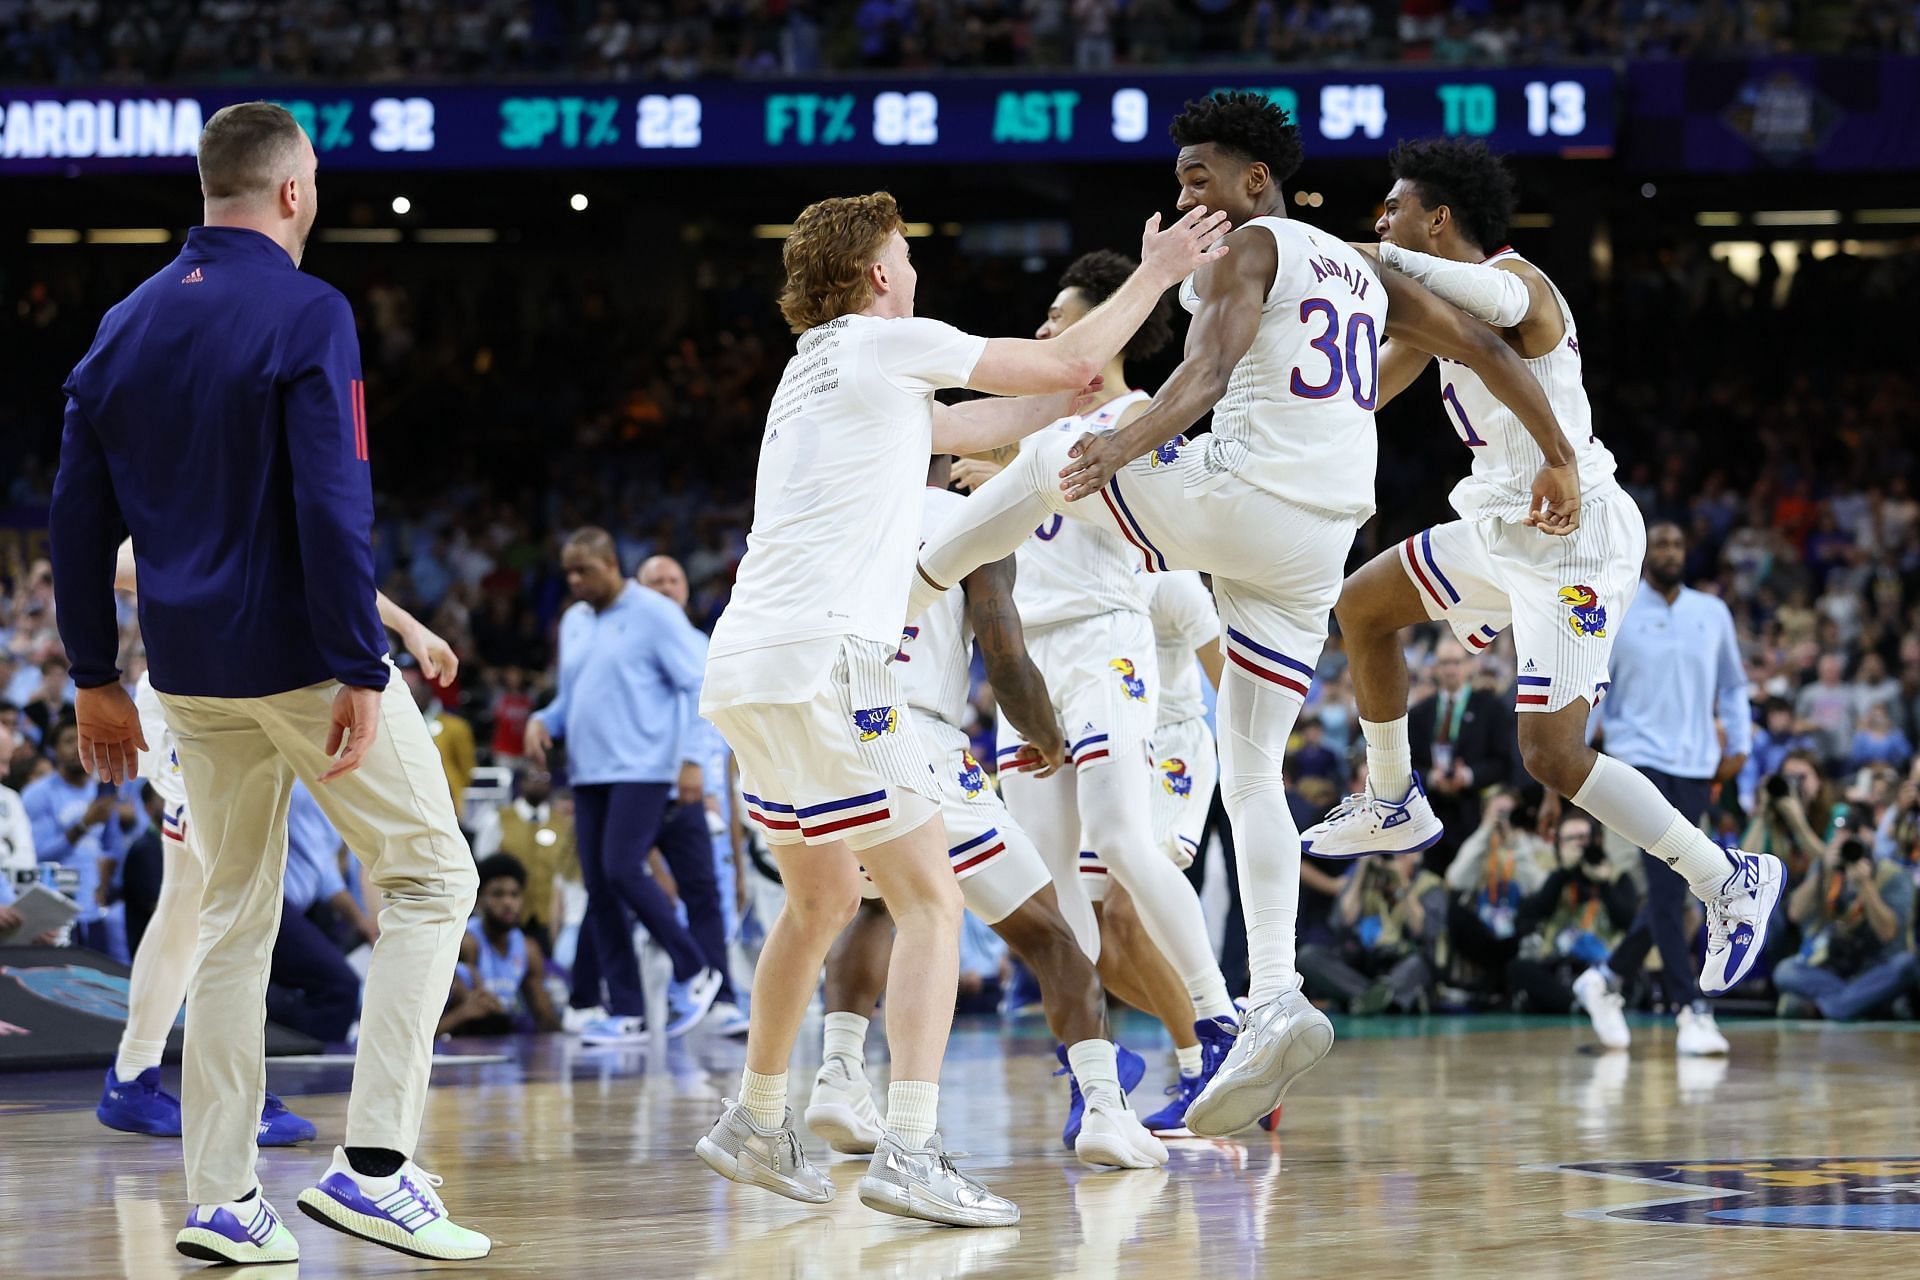 The Jayhawks after winning the national championship